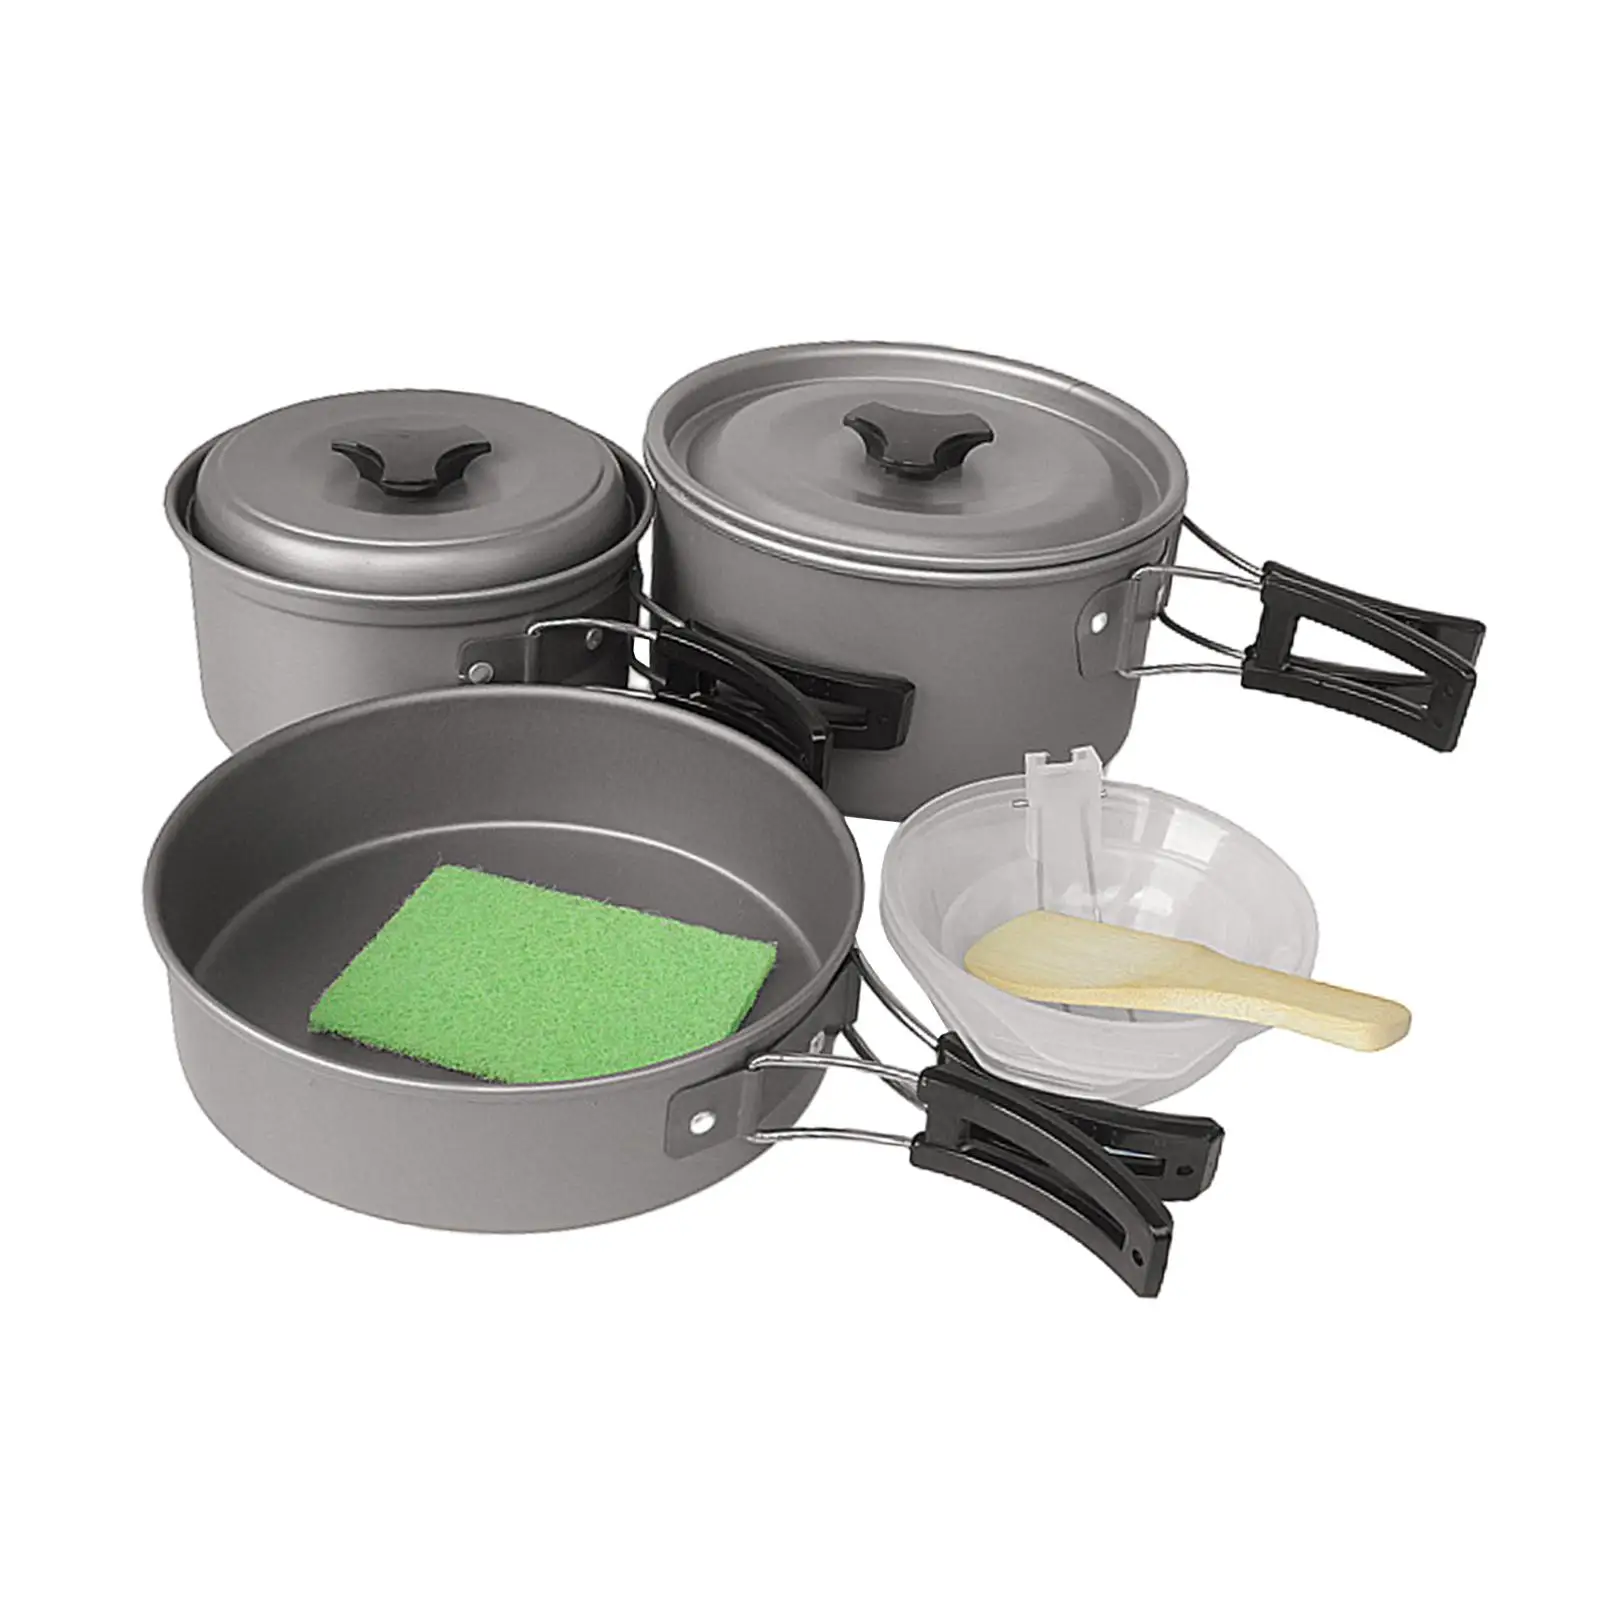 Camping Cookware Set for Campfire Included Mesh Carry Bag Compact Camping